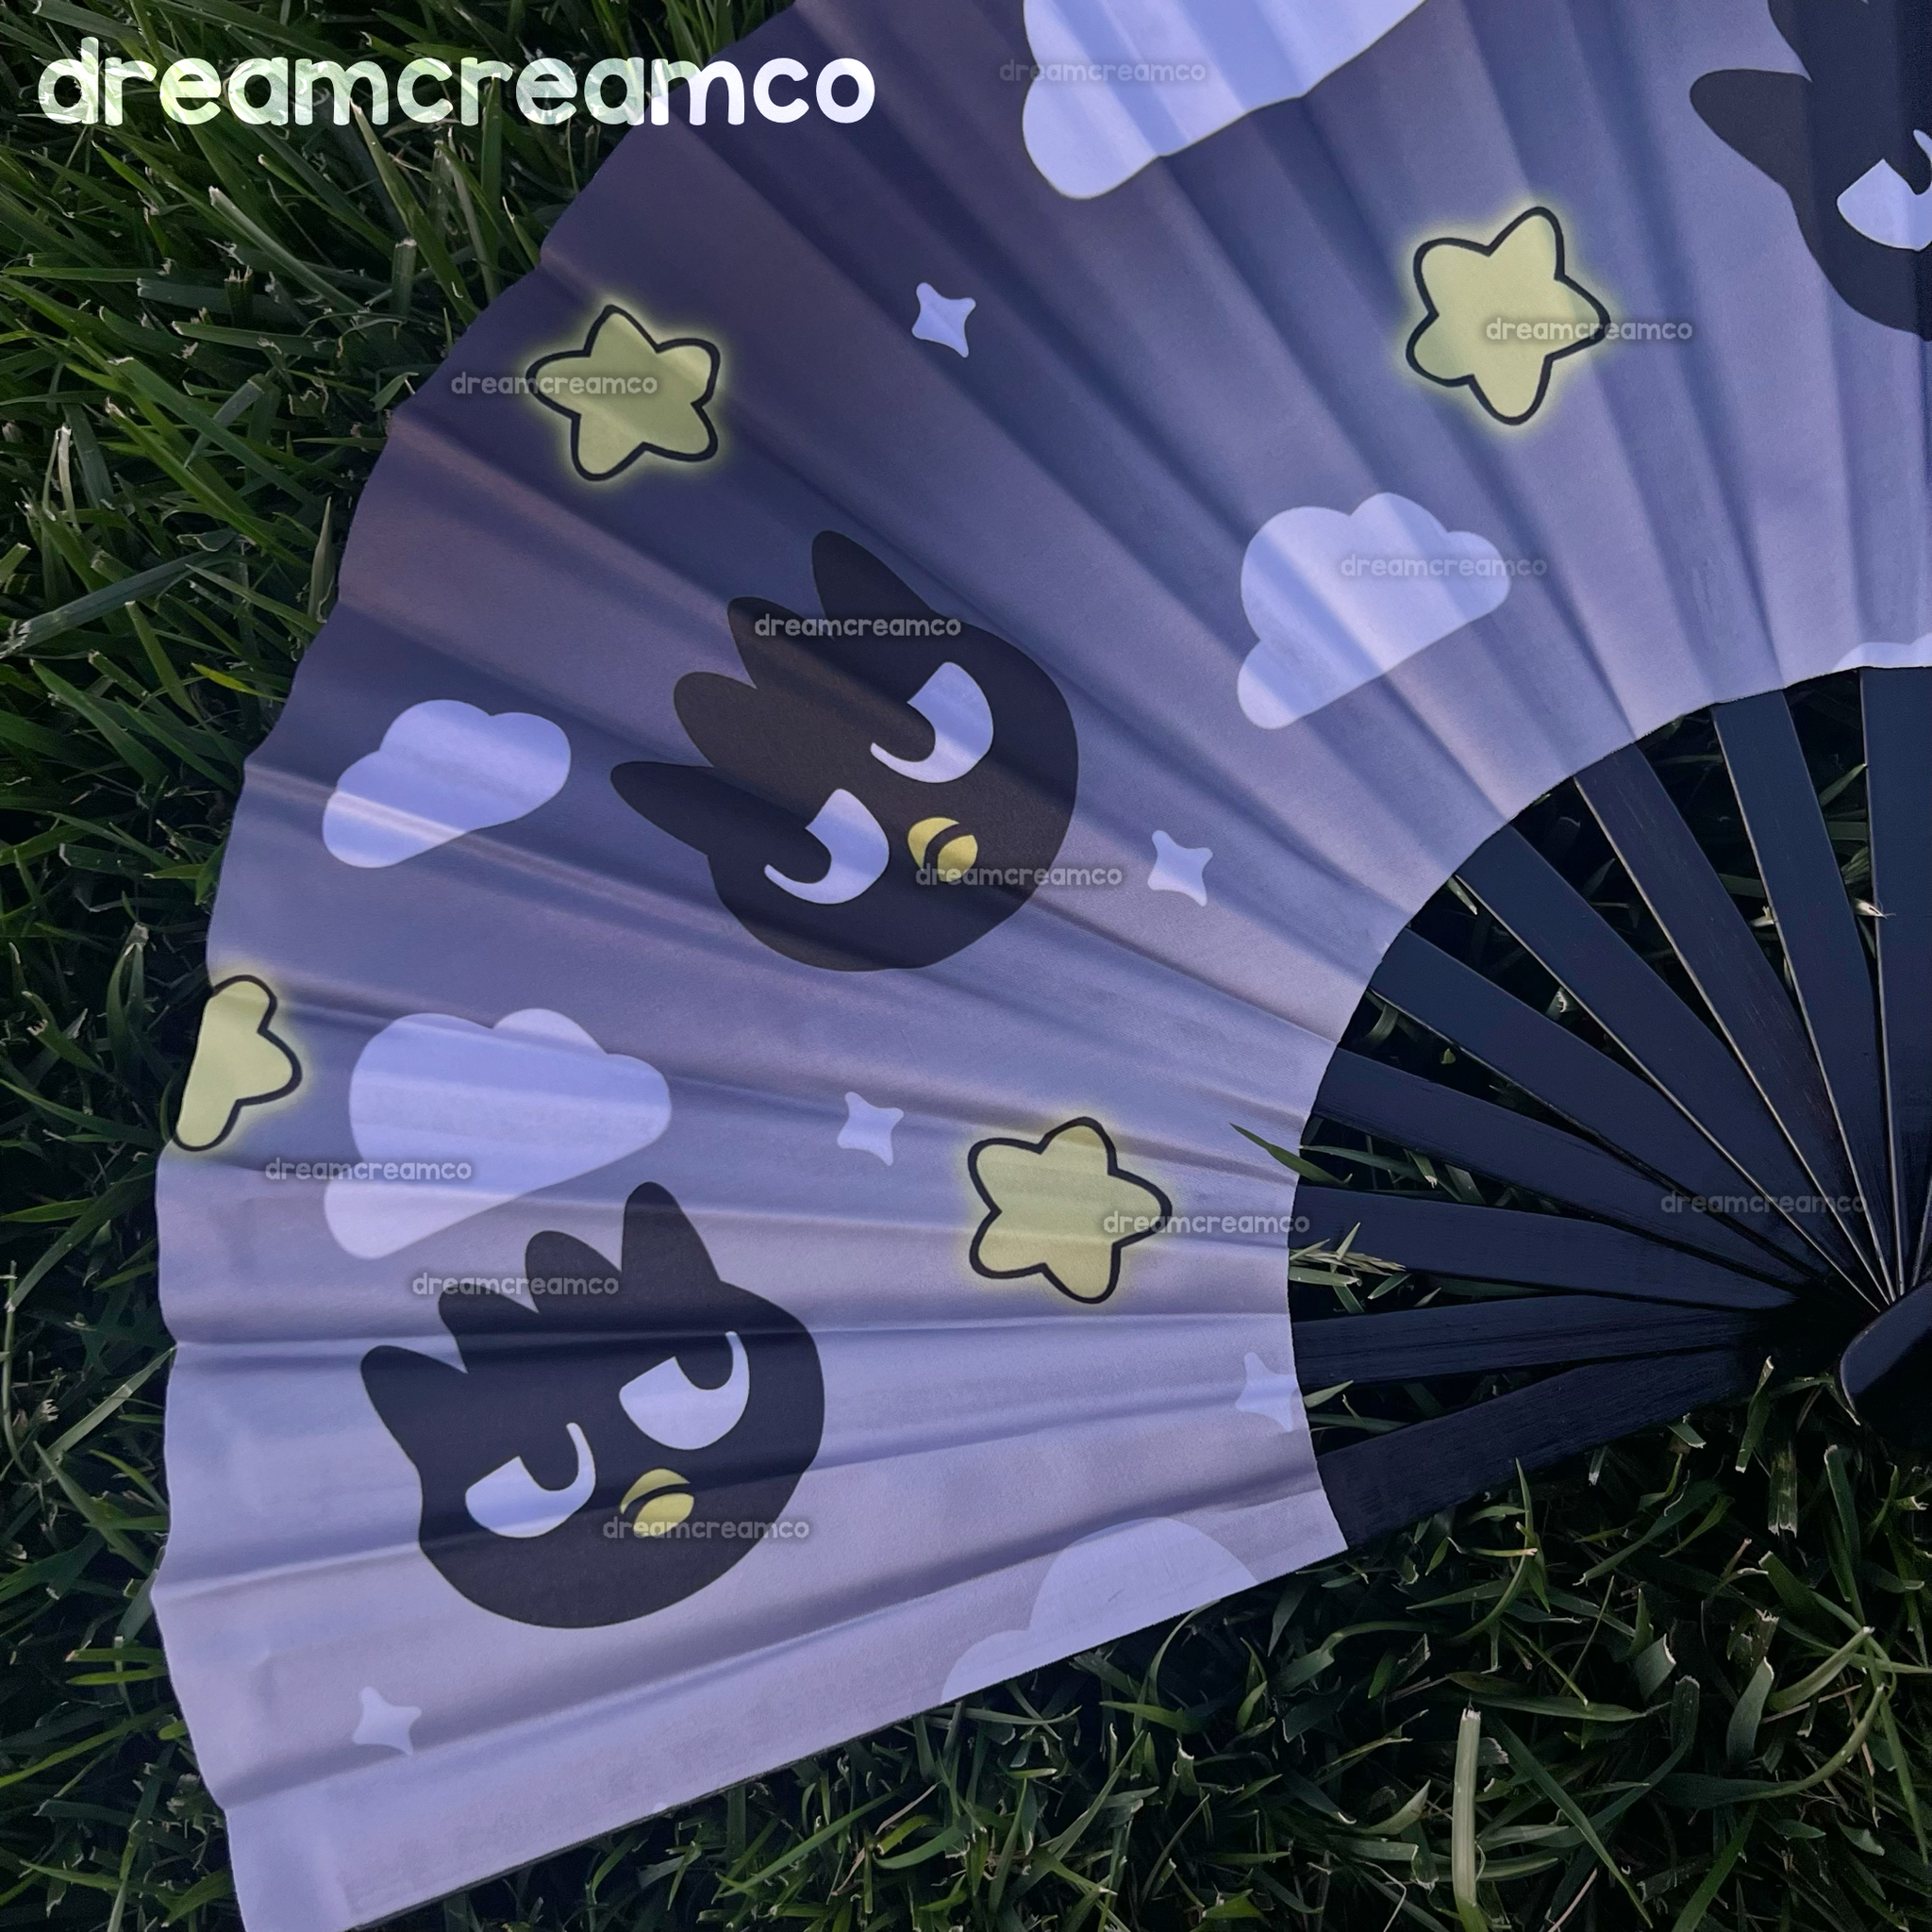  Super cute folding hand fan to cool you down at a crowded convention and/or music festival! These large, durable fans can also be used to elevate your festival fashion, and decorate your spaces as home decor!  ♡ Designed by DreamCreamCo ♡ Size: 13" (inches) while closed ♡ Design printed onto fabric ♡ Bamboo wooden handle ♡ Folding fan capability